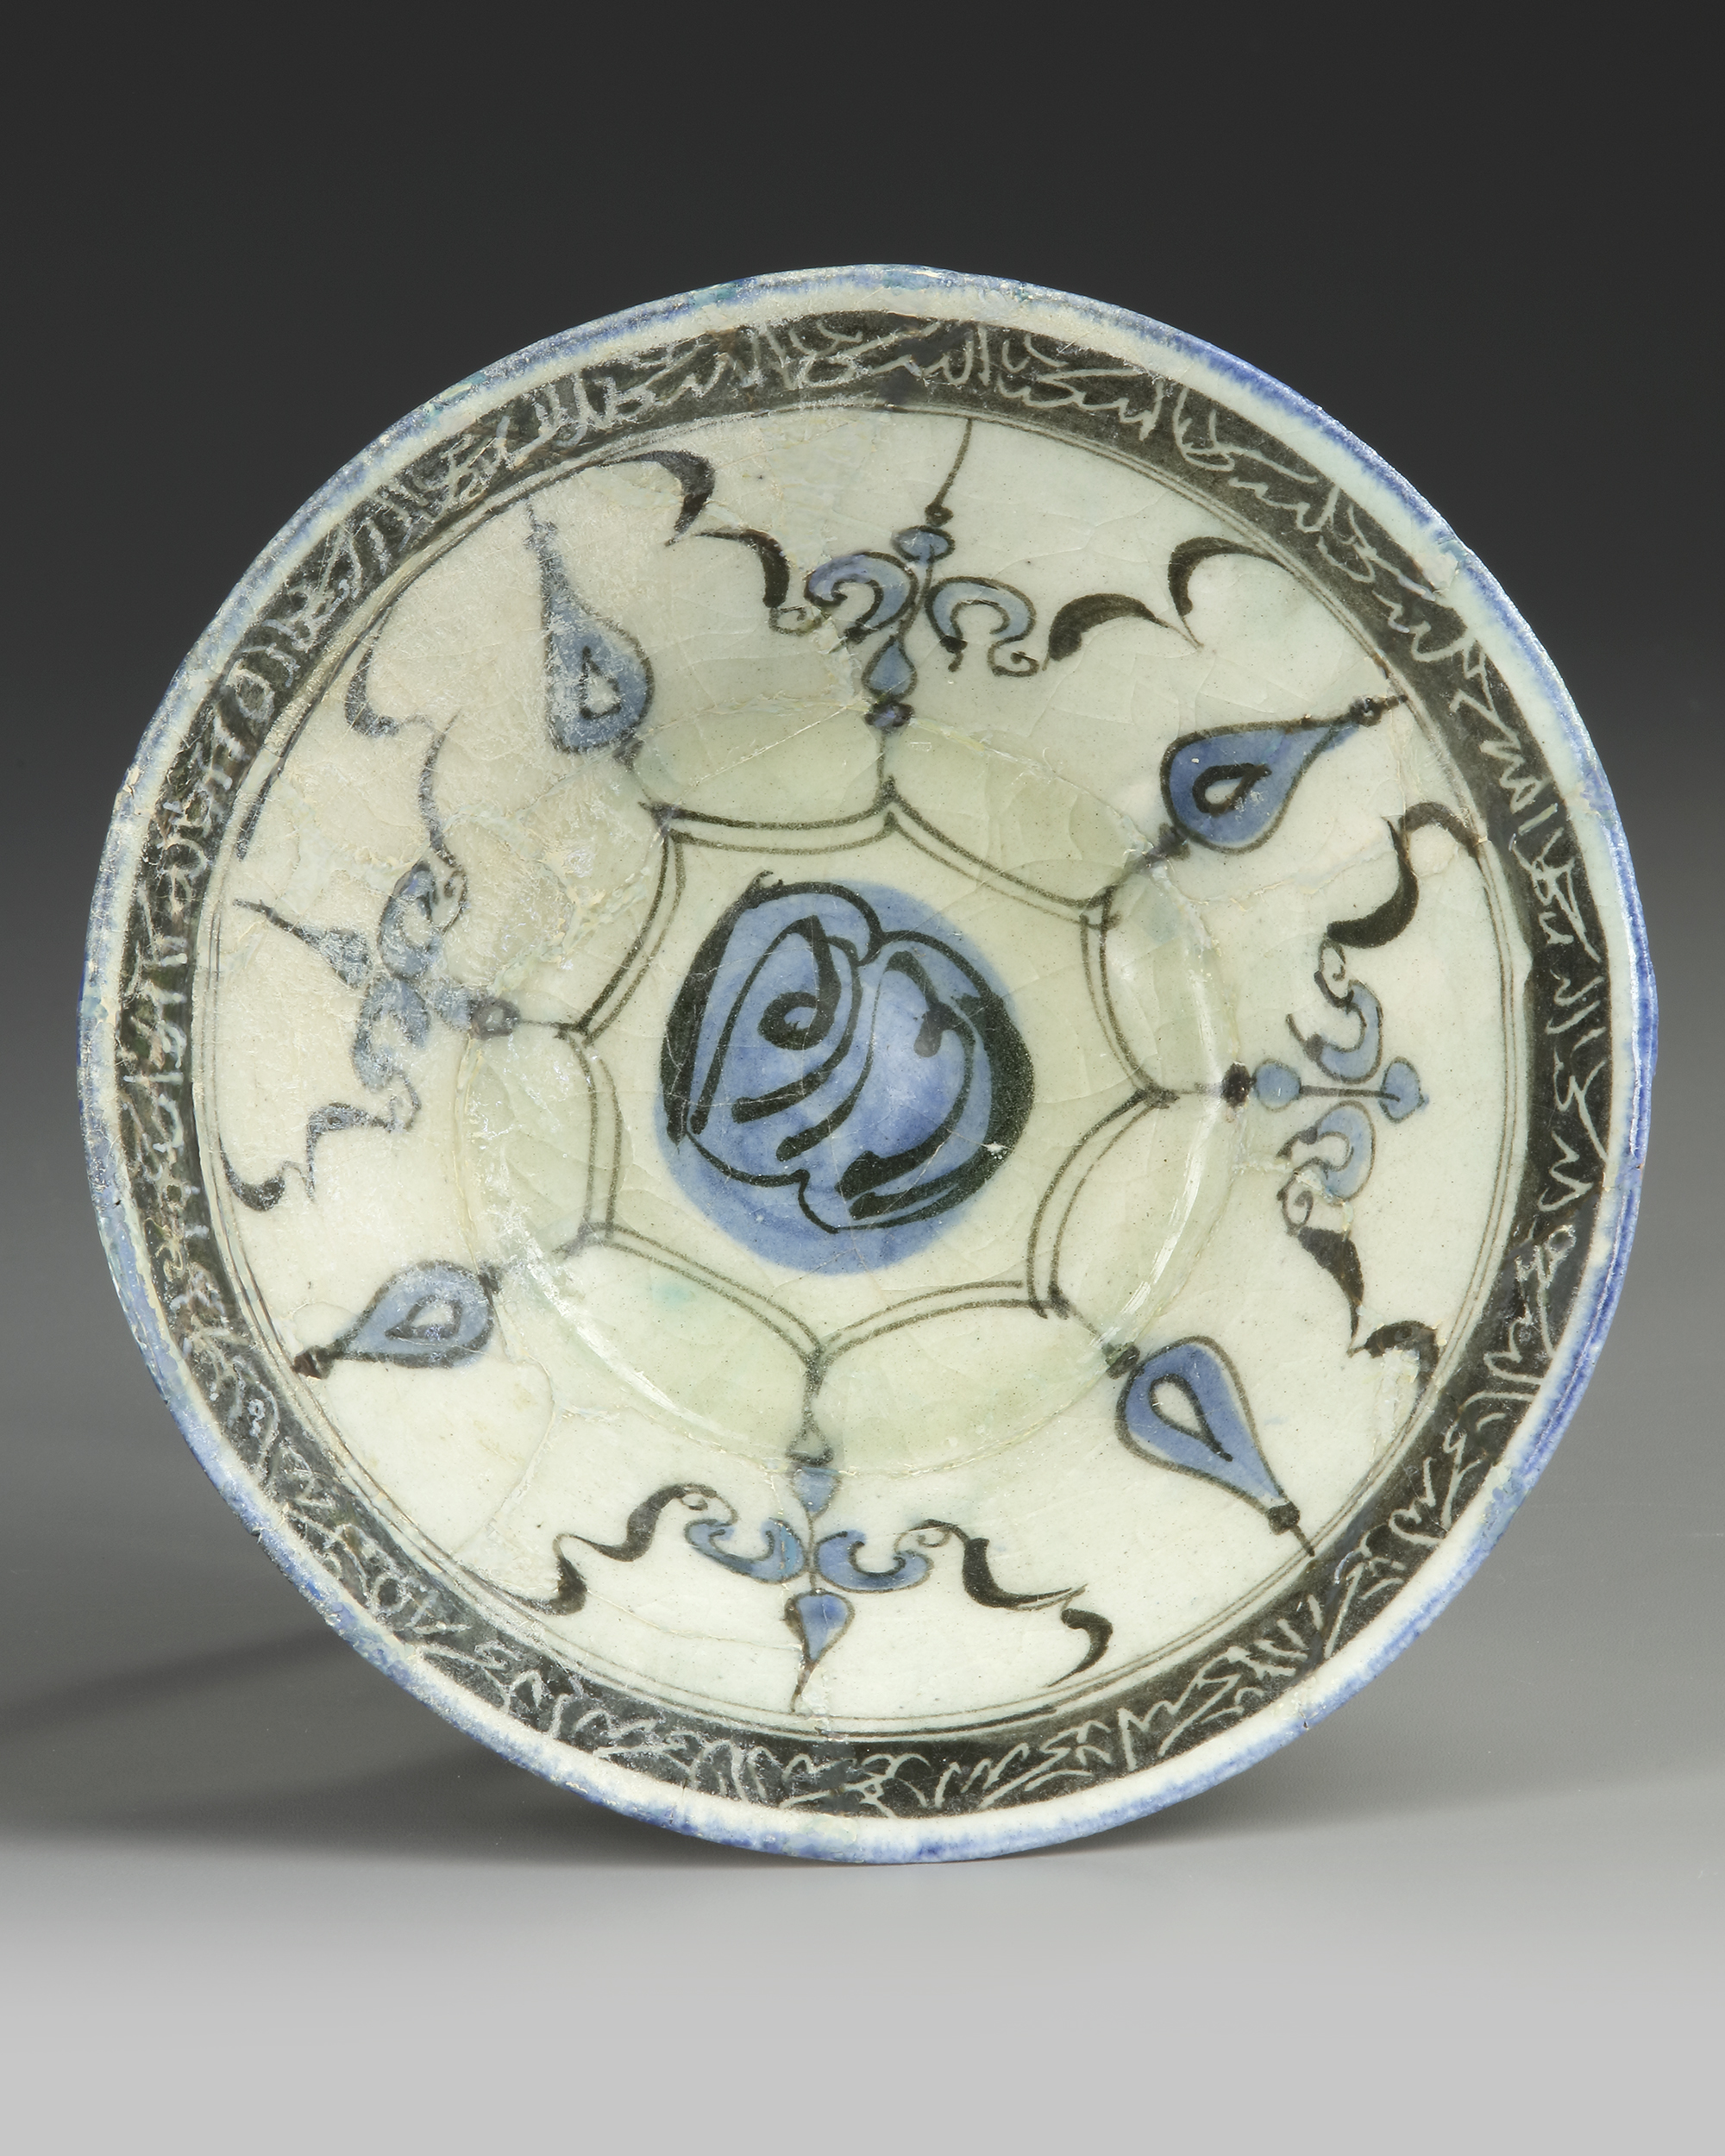 A KASHAN POTTERY BOWL, PERSIA, 13TH CENTURY - Image 2 of 8